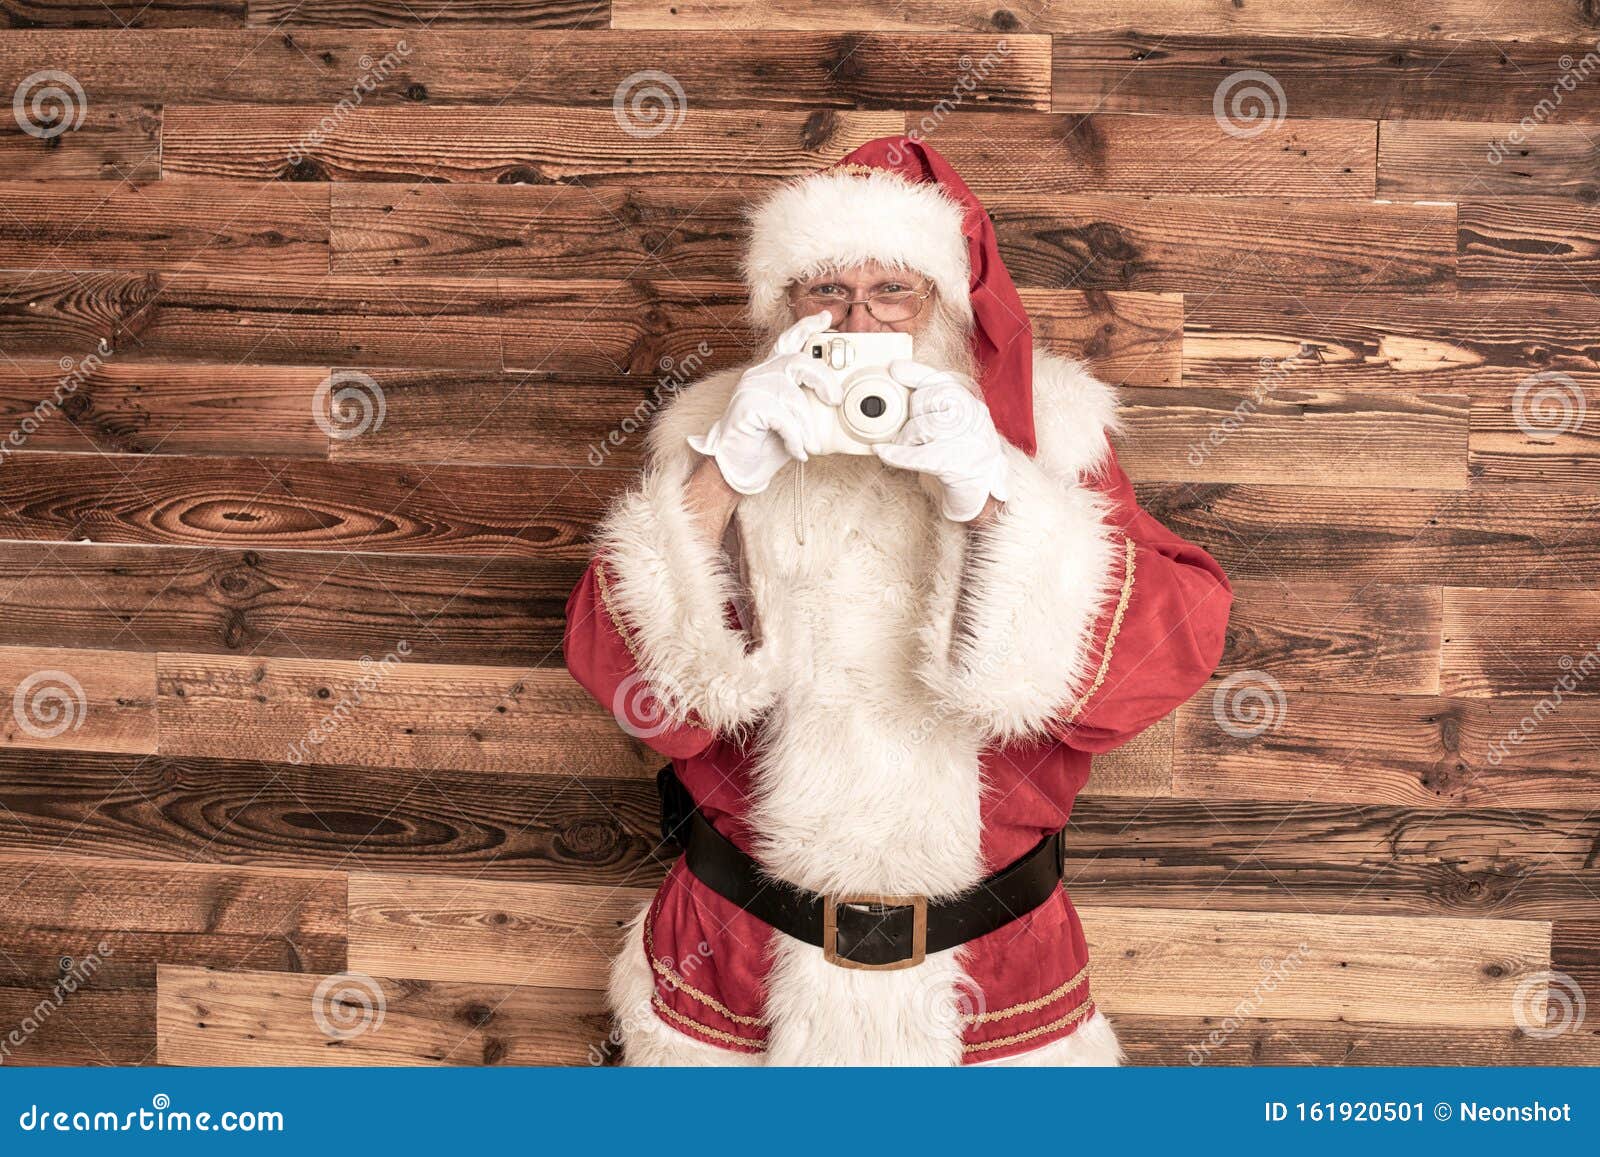 https://thumbs.dreamstime.com/z/santa-claus-taking-photo-polaroid-camera-real-red-cap-posing-wooden-wall-looking-merry-christmas-happy-new-year-161920501.jpg